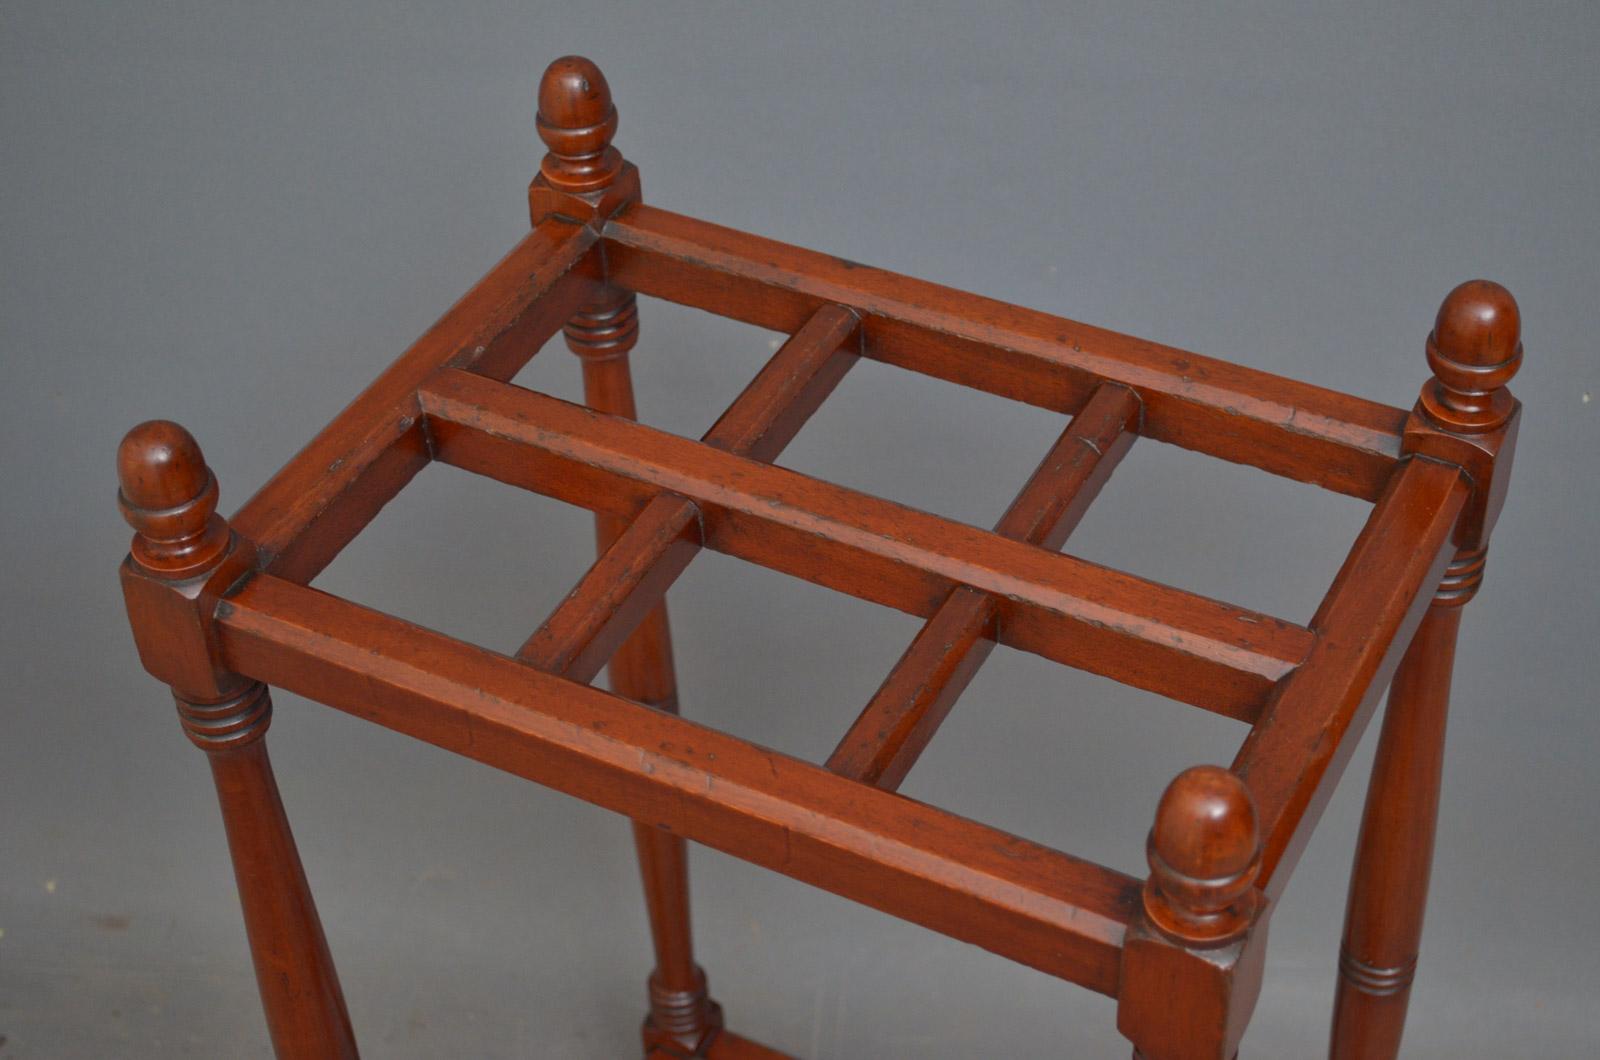 Sn4521 turn of the century mahogany stick stand / umbrella stand with 6 compartment, acorn finials and turned and ringed supports and original removable drip tray, all in home ready condition, circa 1900
Measures: H 28